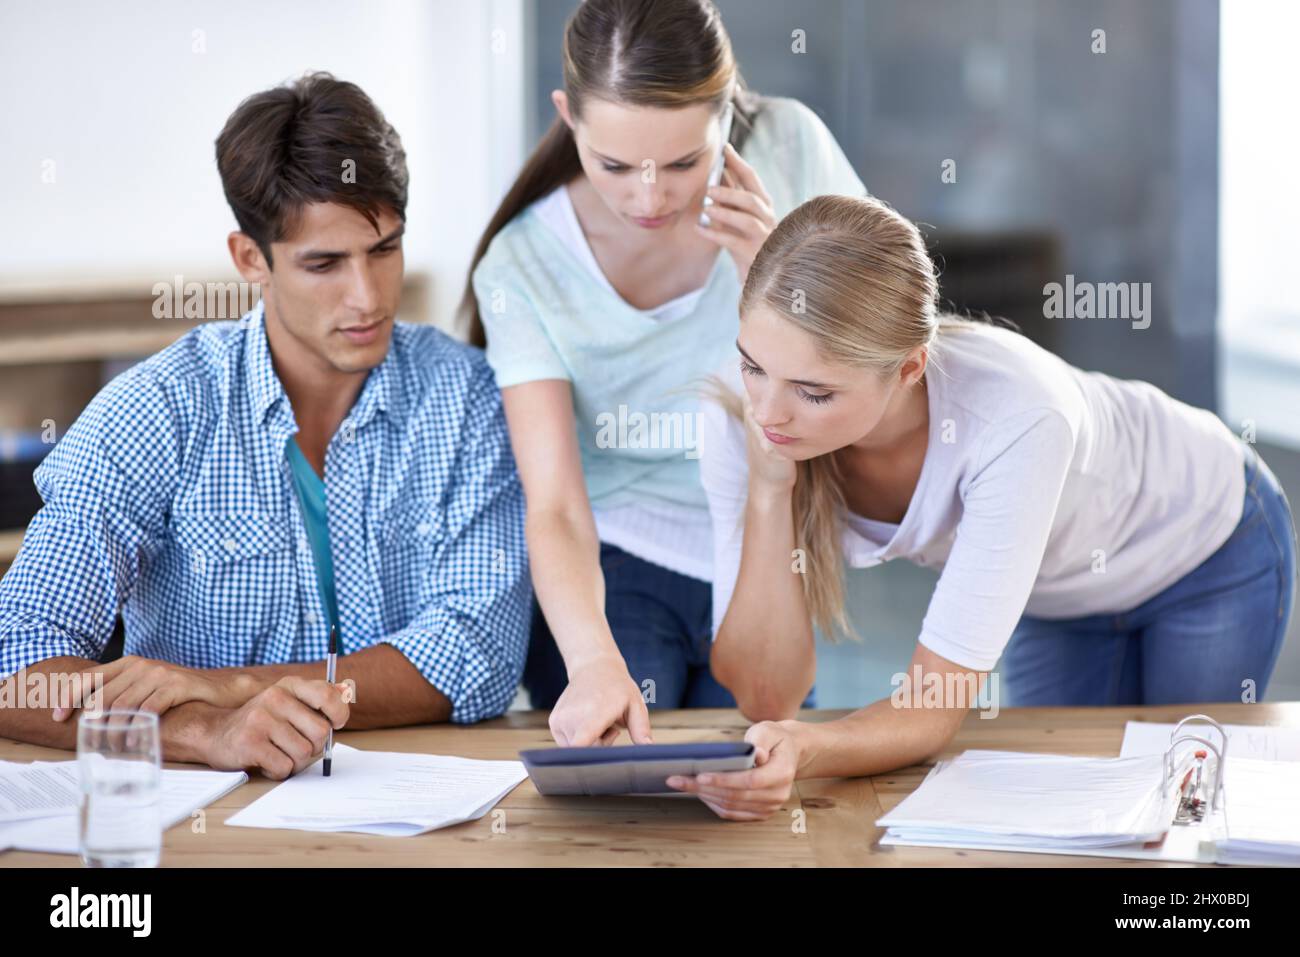 Working together to meet your design needs. Young editors working together on a project. Stock Photo